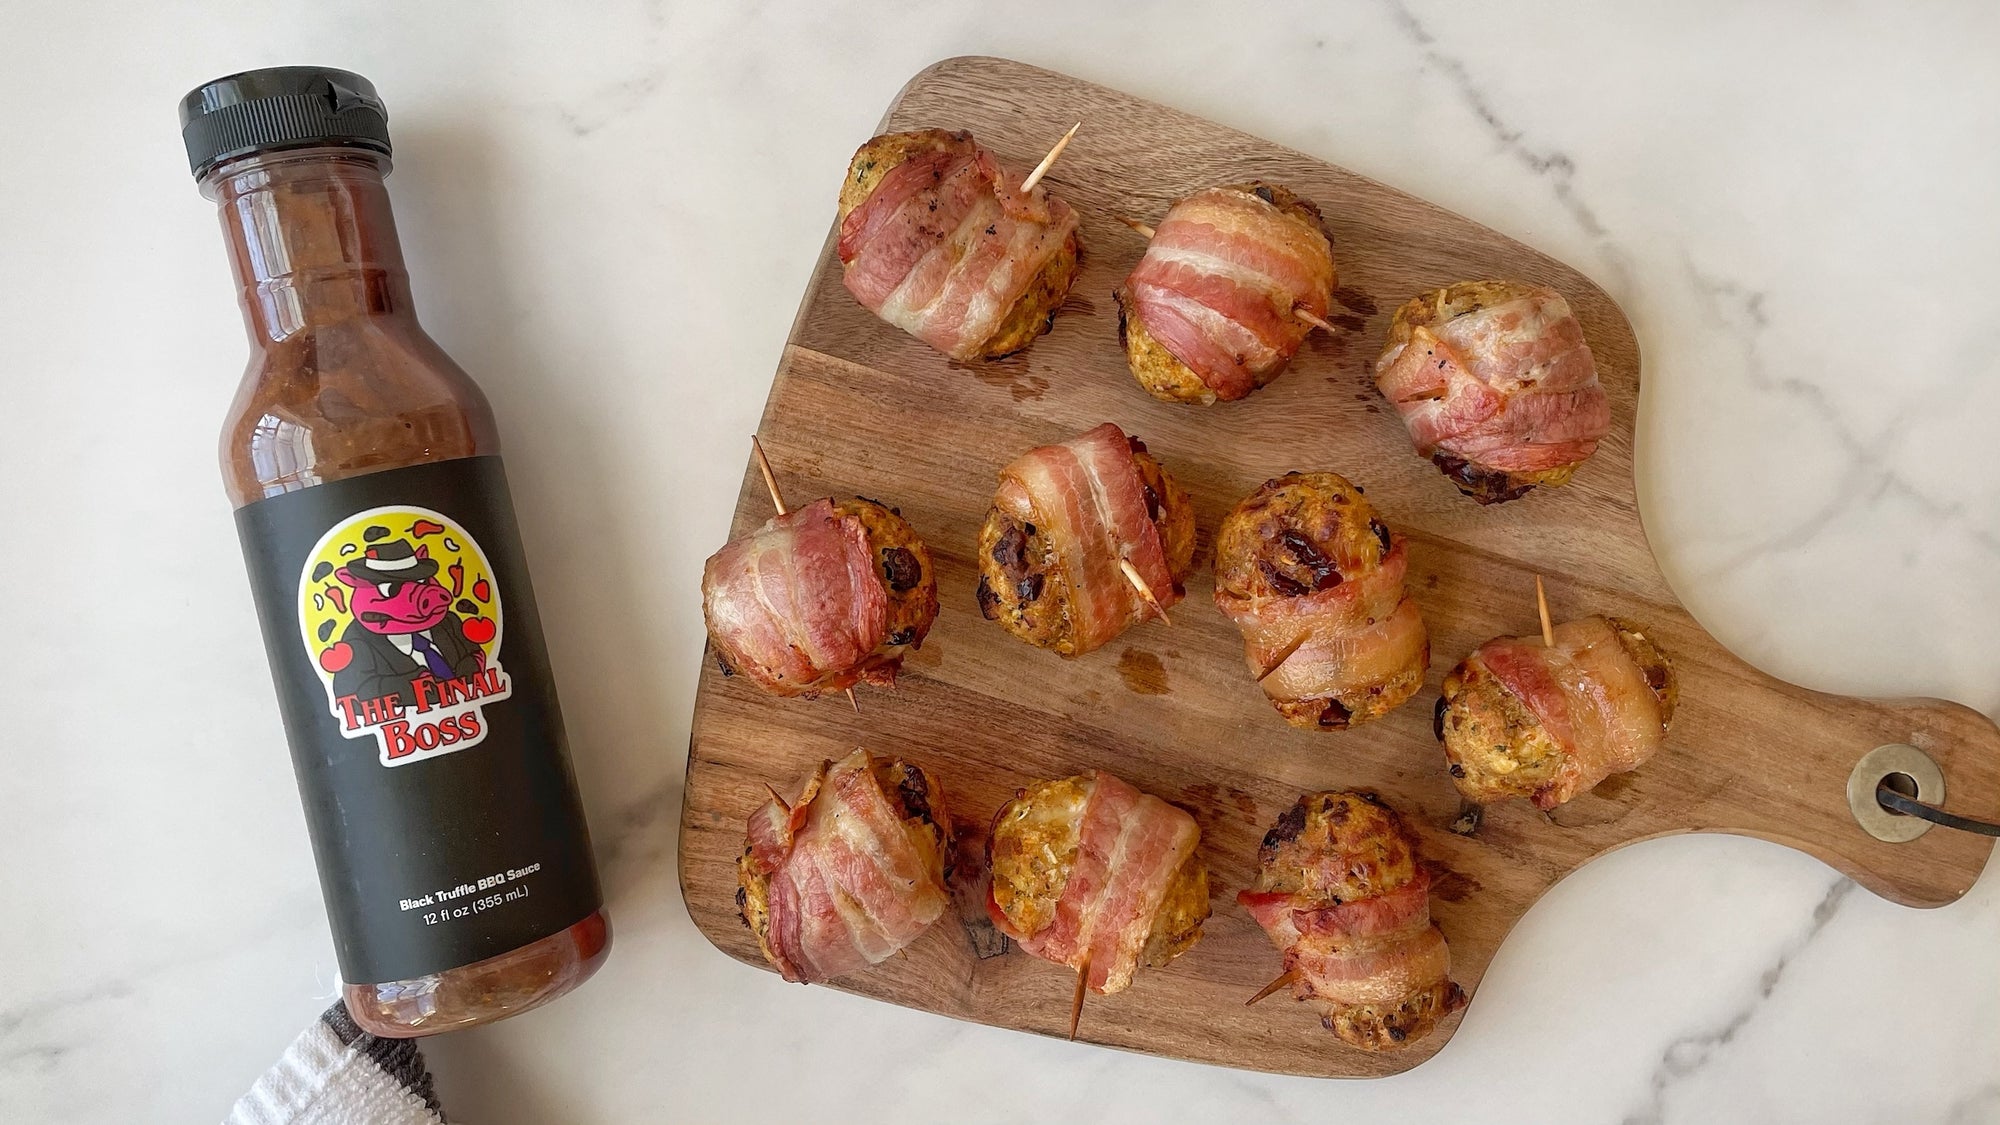 Bacon-Wrapped Stuffing Balls with The Final Boss Truffle BBQ Sauce